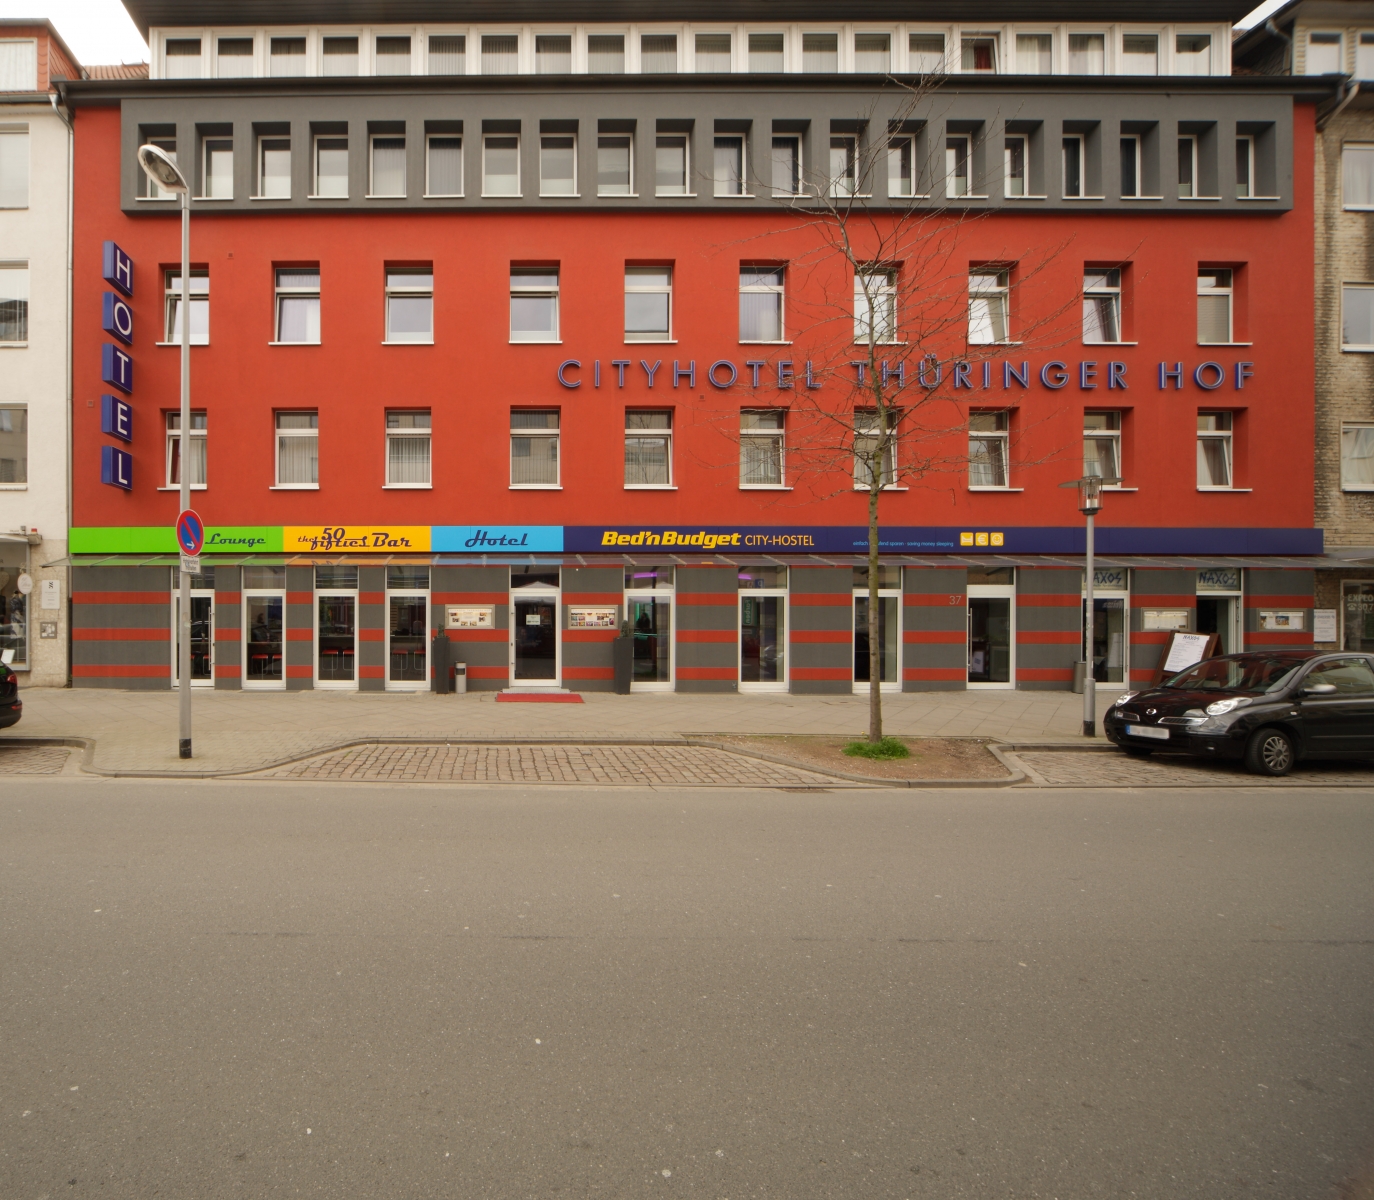 Bed'nBudget Cityhostel Hannover <br/>58.00 ew <br/> <a href='http://vakantieoplossing.nl/outpage/?id=06801ab1e87f88df1f240470f7dc66d9' target='_blank'>View Details</a>